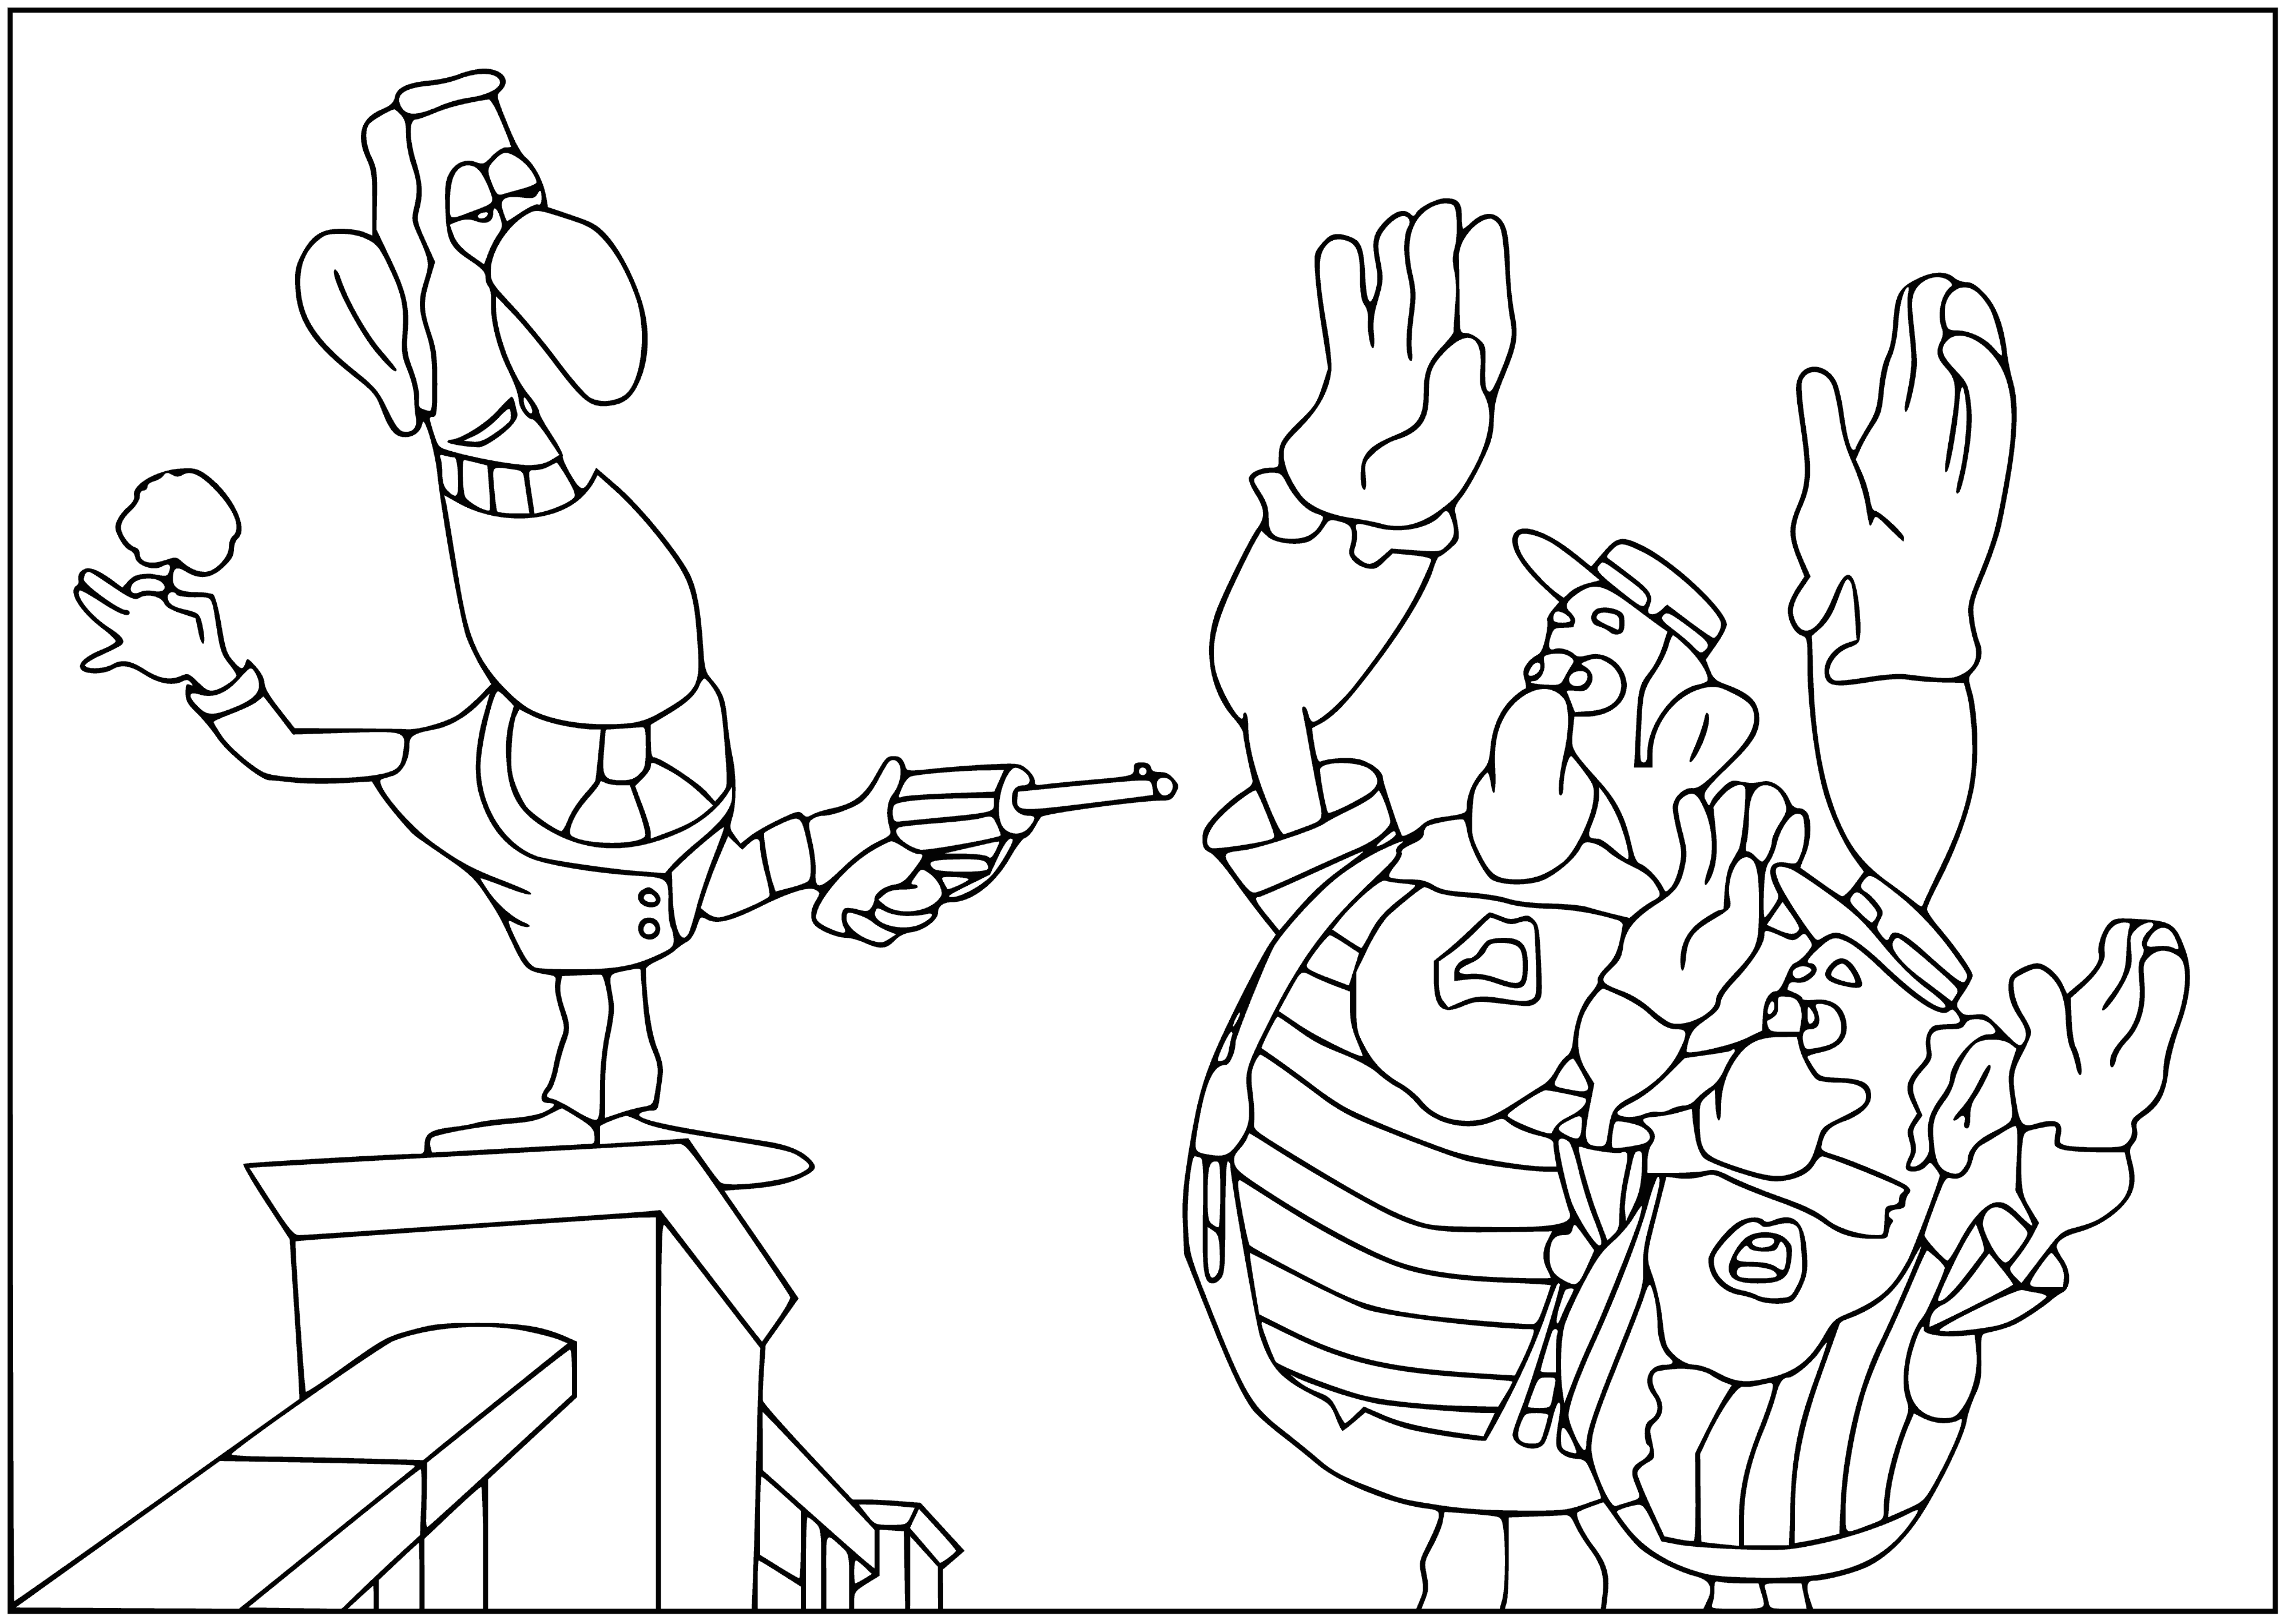 coloring page: A muscular man with a beard and bandana stands on a crate, sword and pistol in hand, with determination on his face as he stares into the distance.